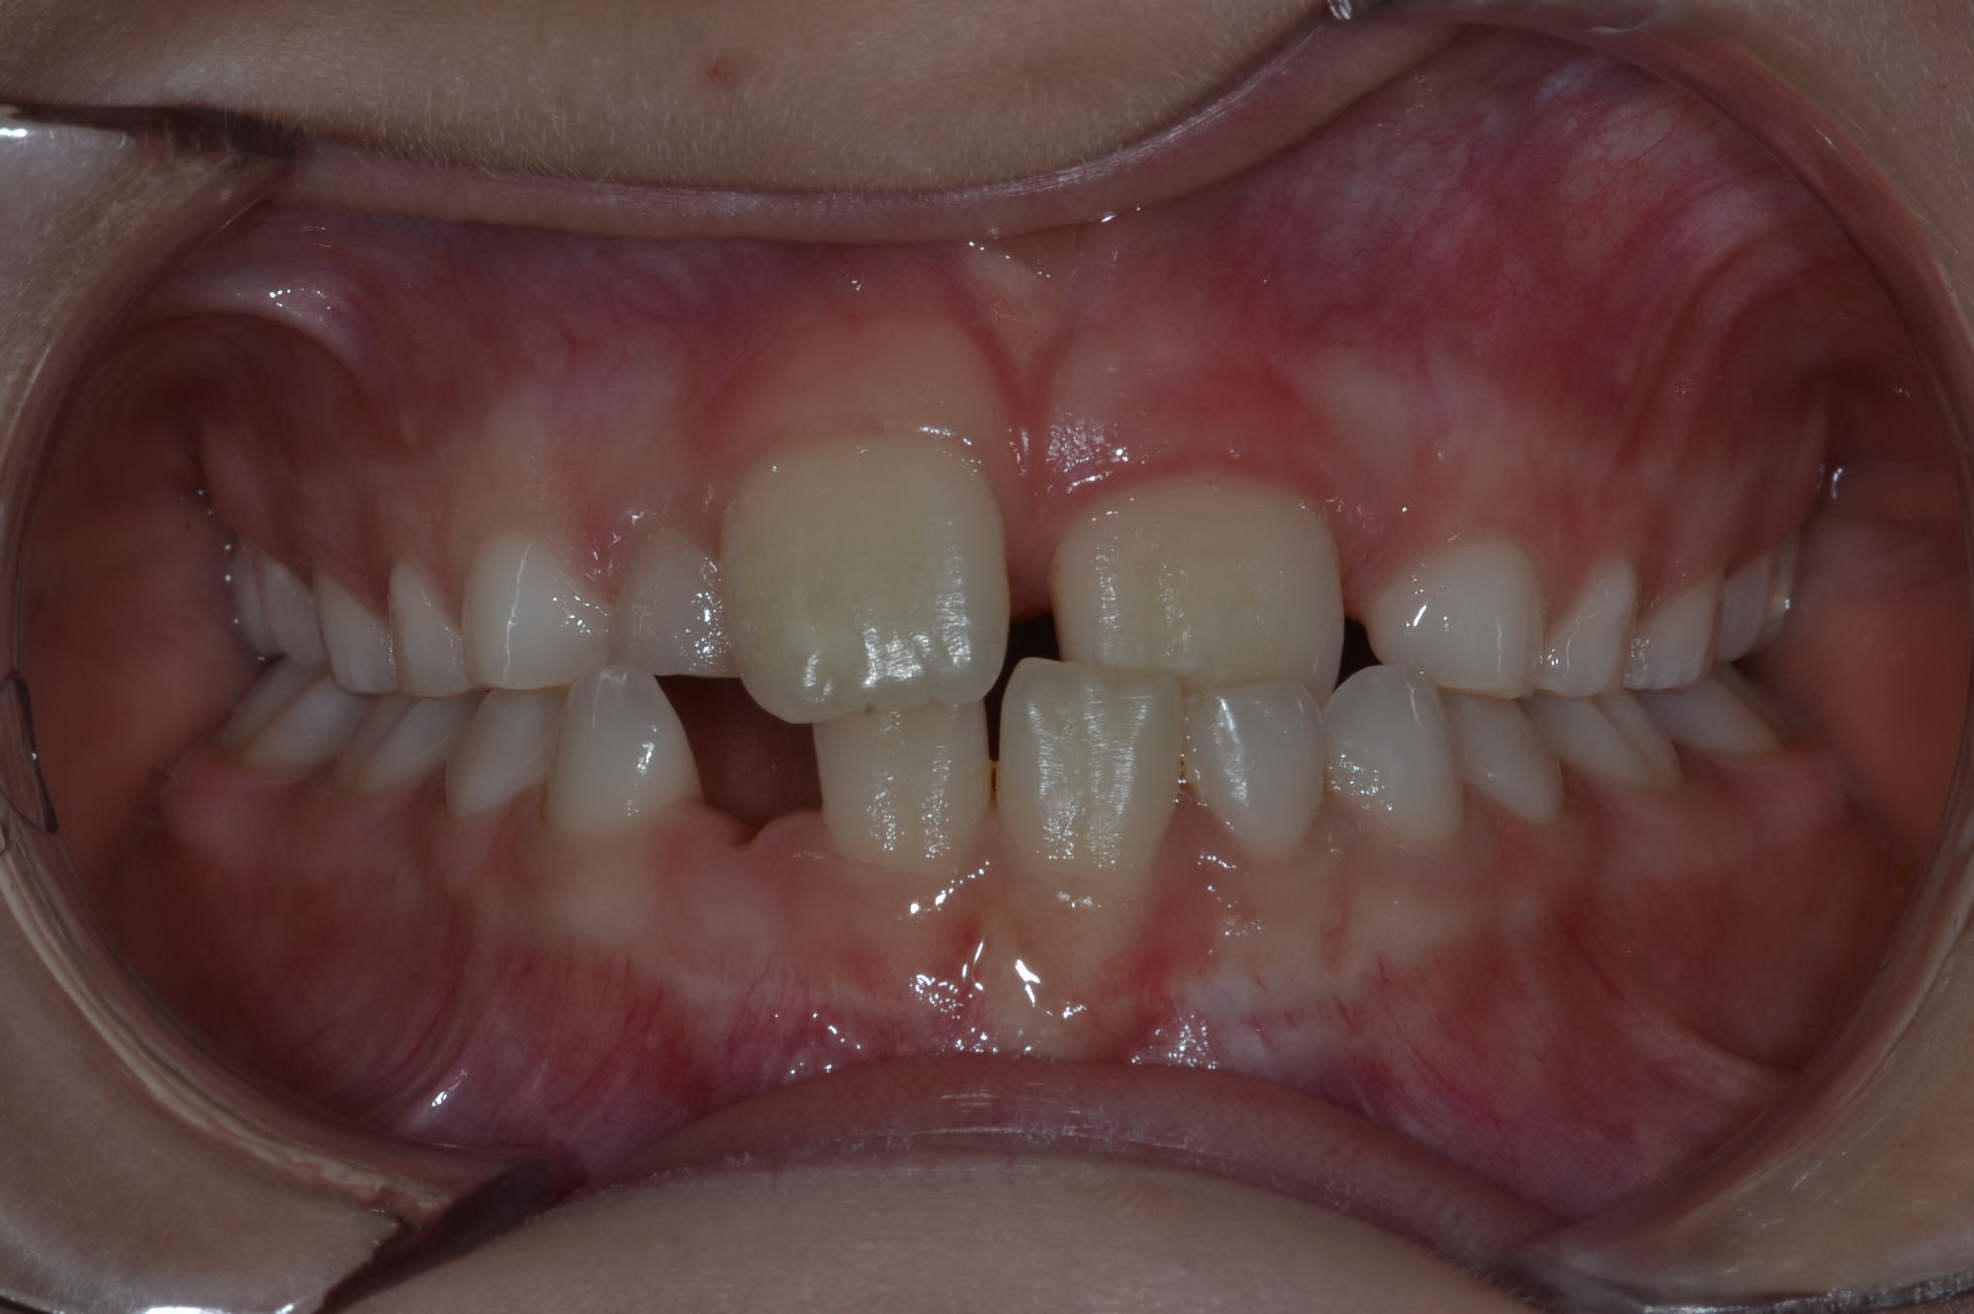 The success of the Invisalign Treatment - Dr Normand Bach